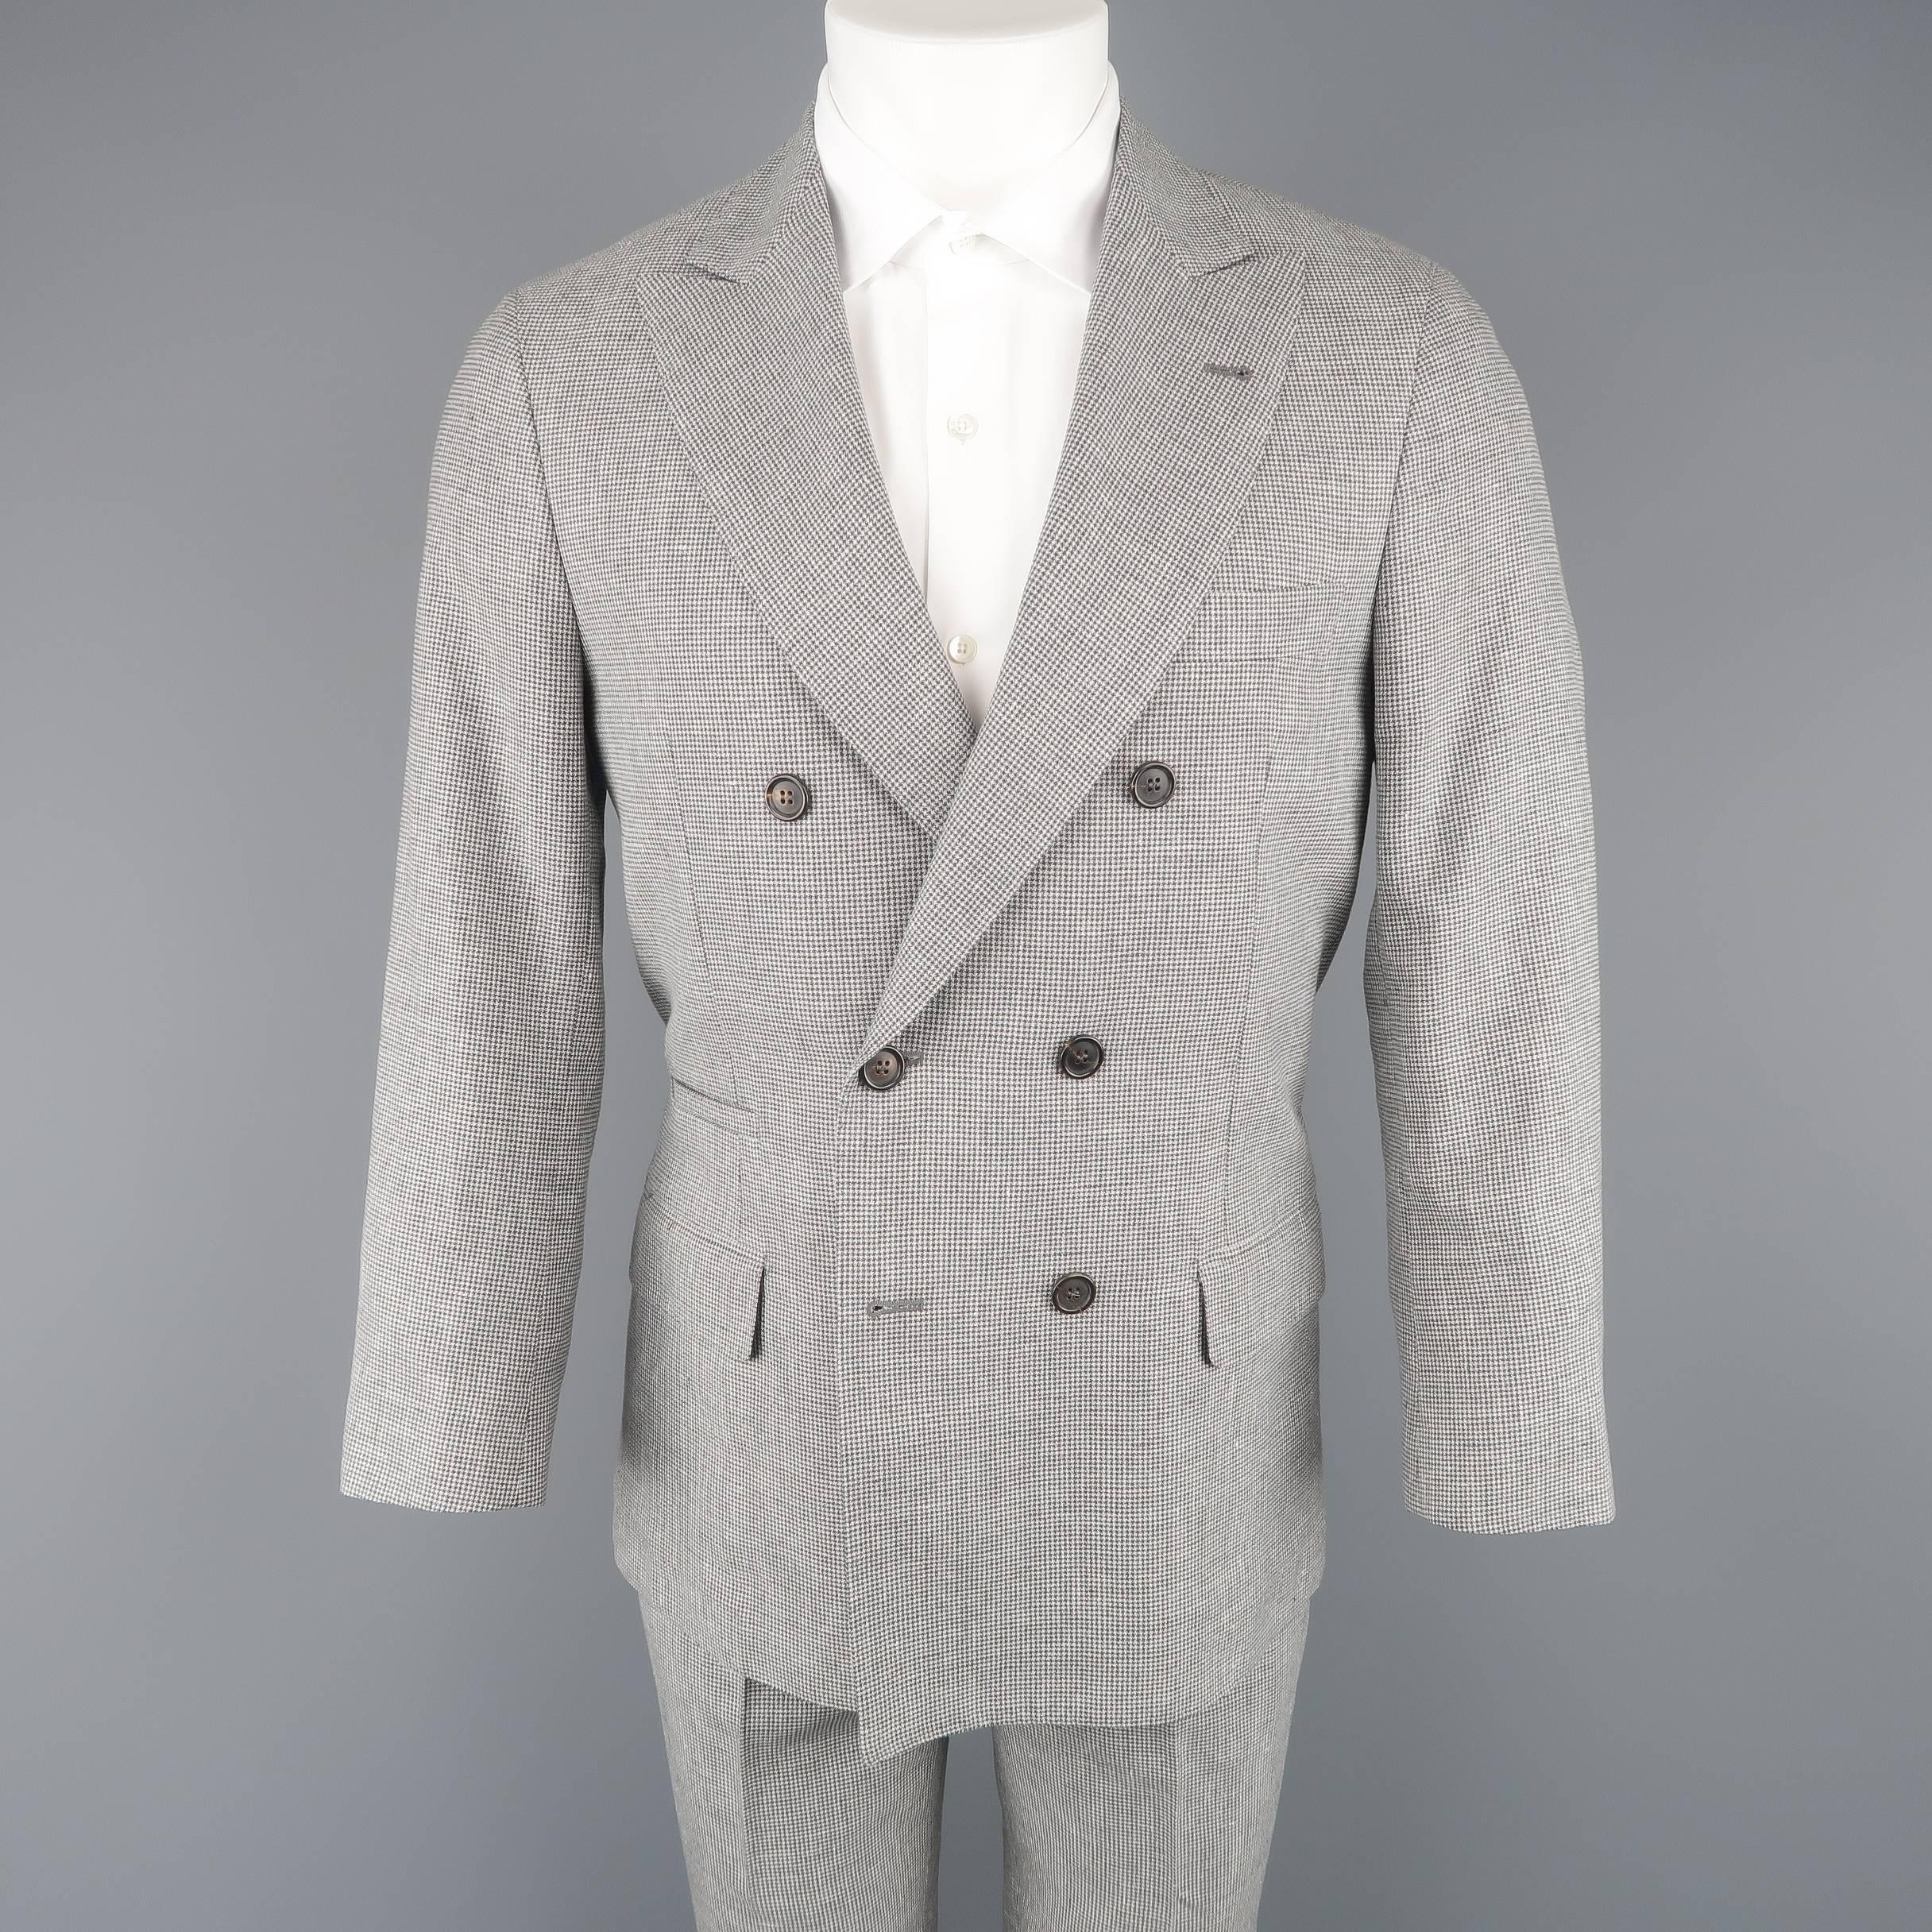 Two piece BRUNELLO CUCINELLI suit comes in a black and white houndstooth print linen, wool, and silk blend fabric and includes a double breasted, peak lapel sport coat with functional button cuffs and matching cuffed  flat front trousers. Made in